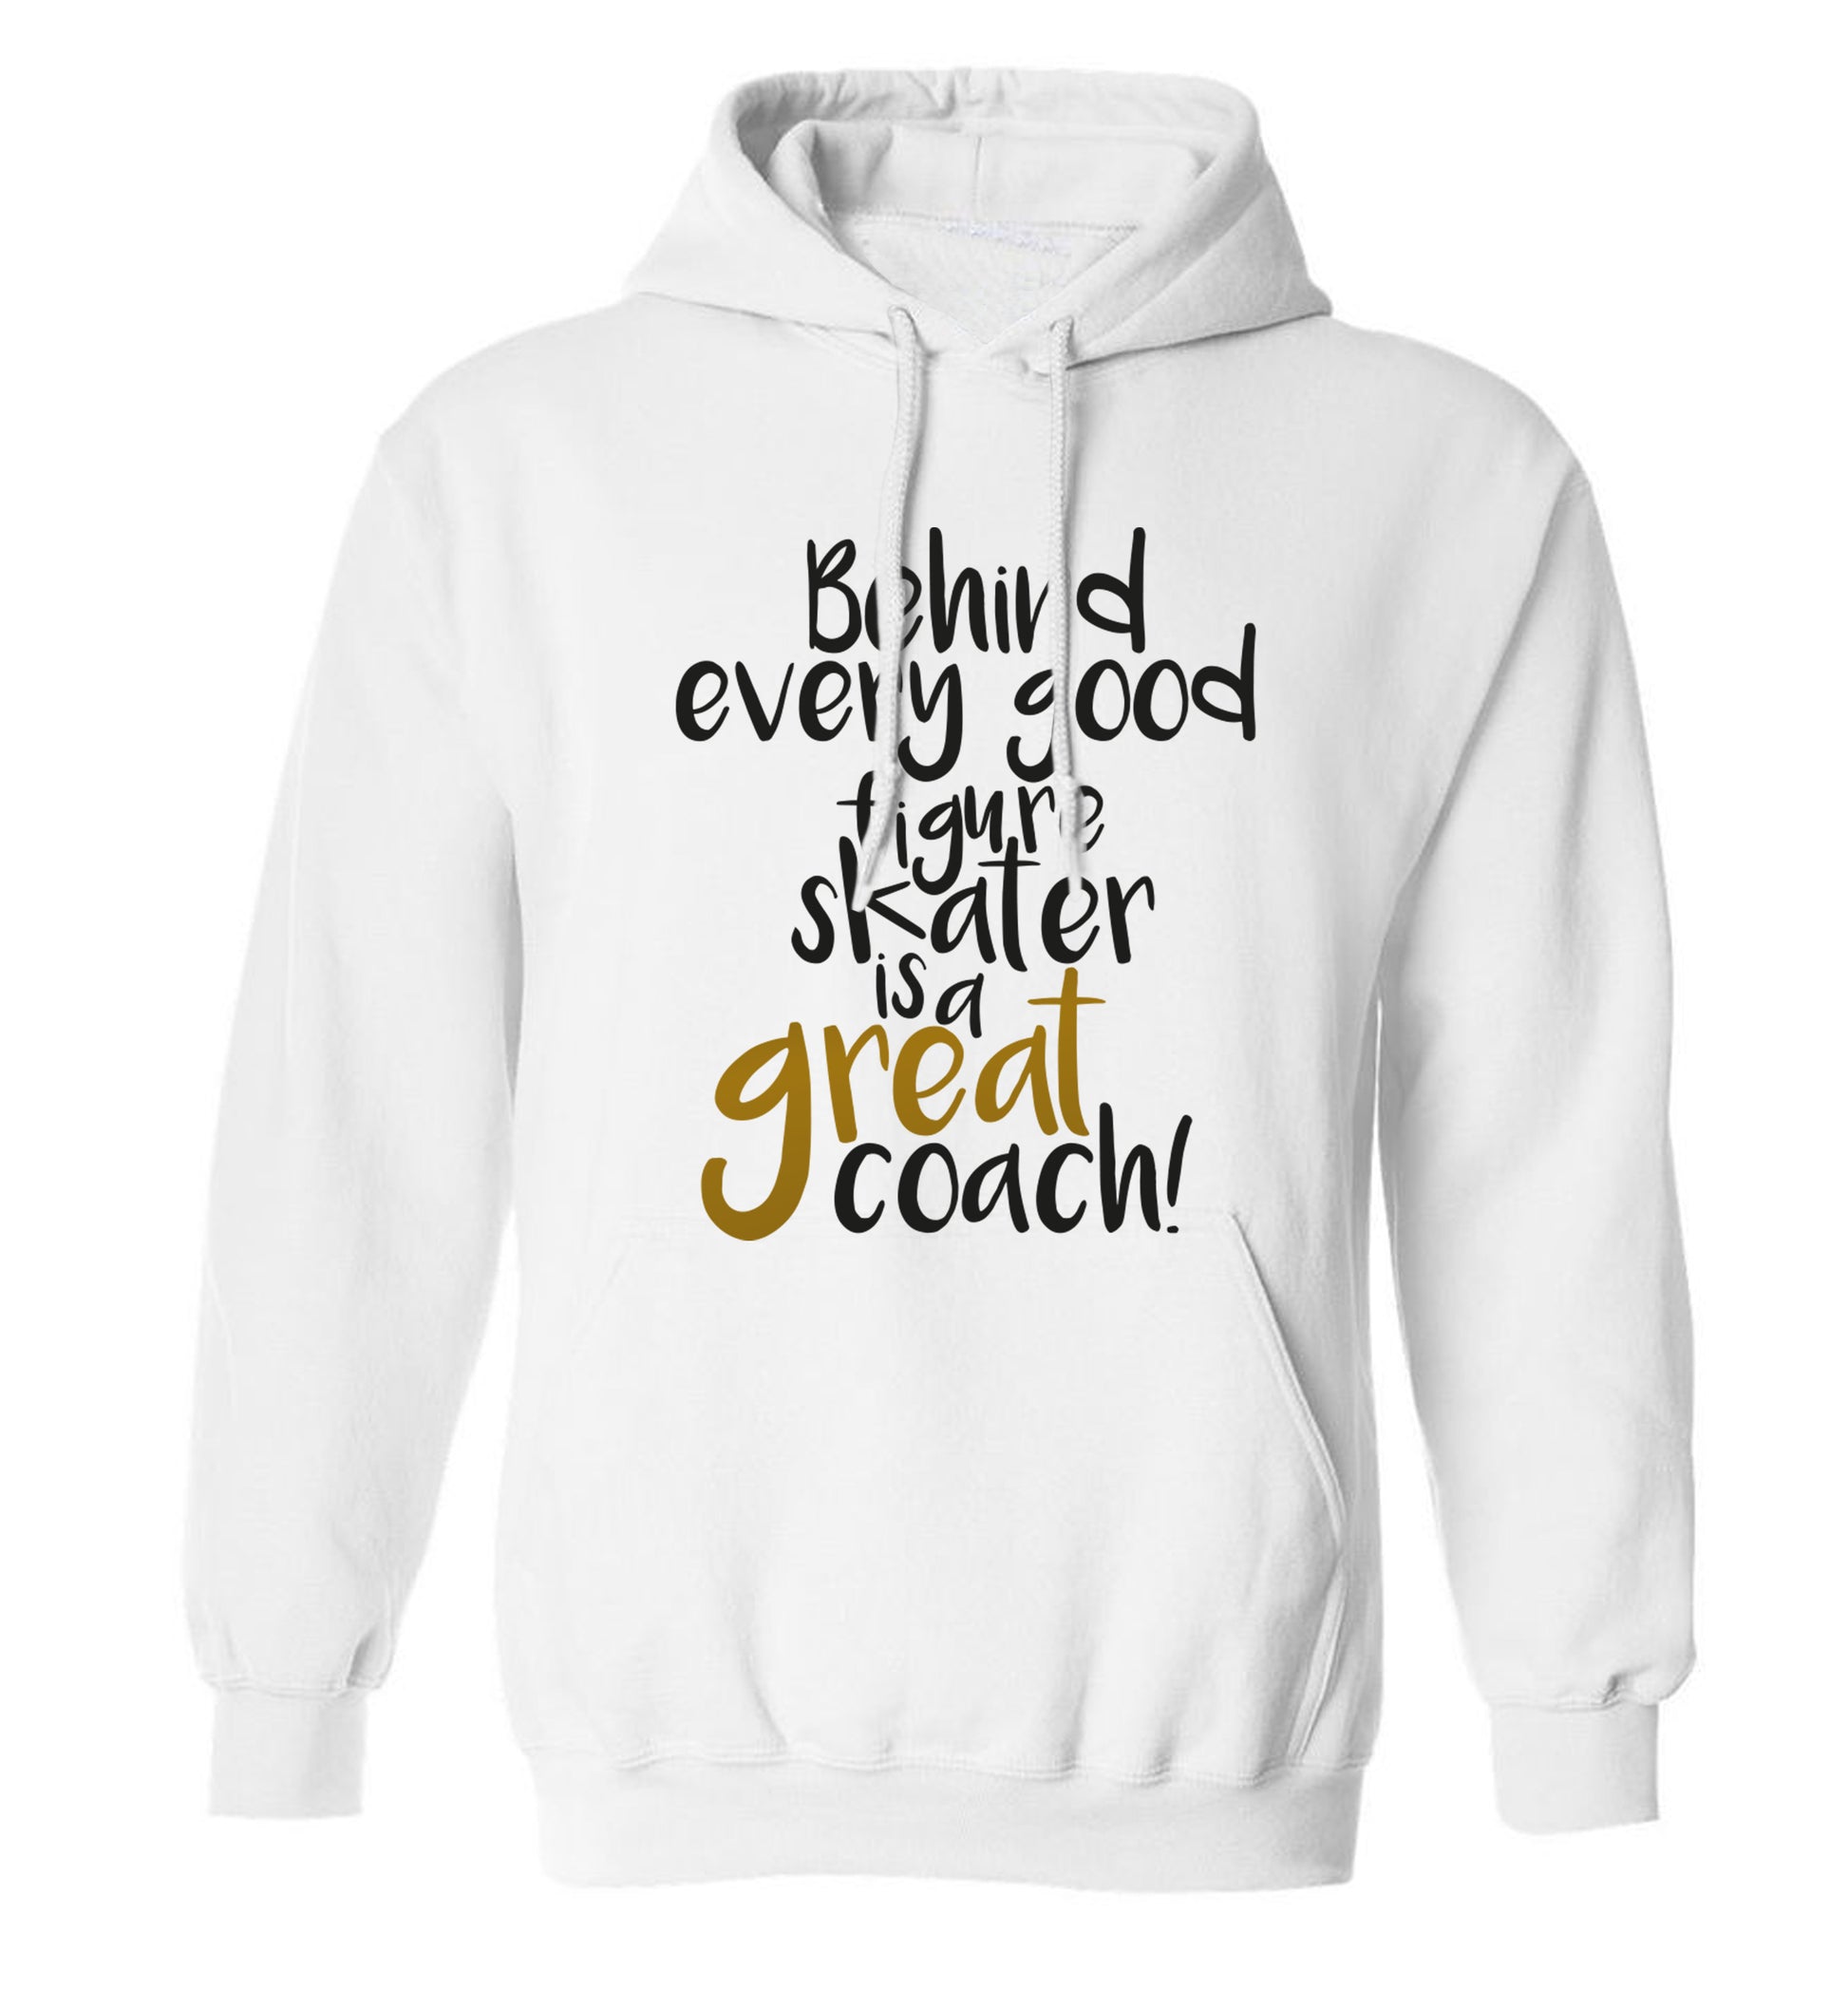 Behind every good figure skater is a great coach adults unisexwhite hoodie 2XL